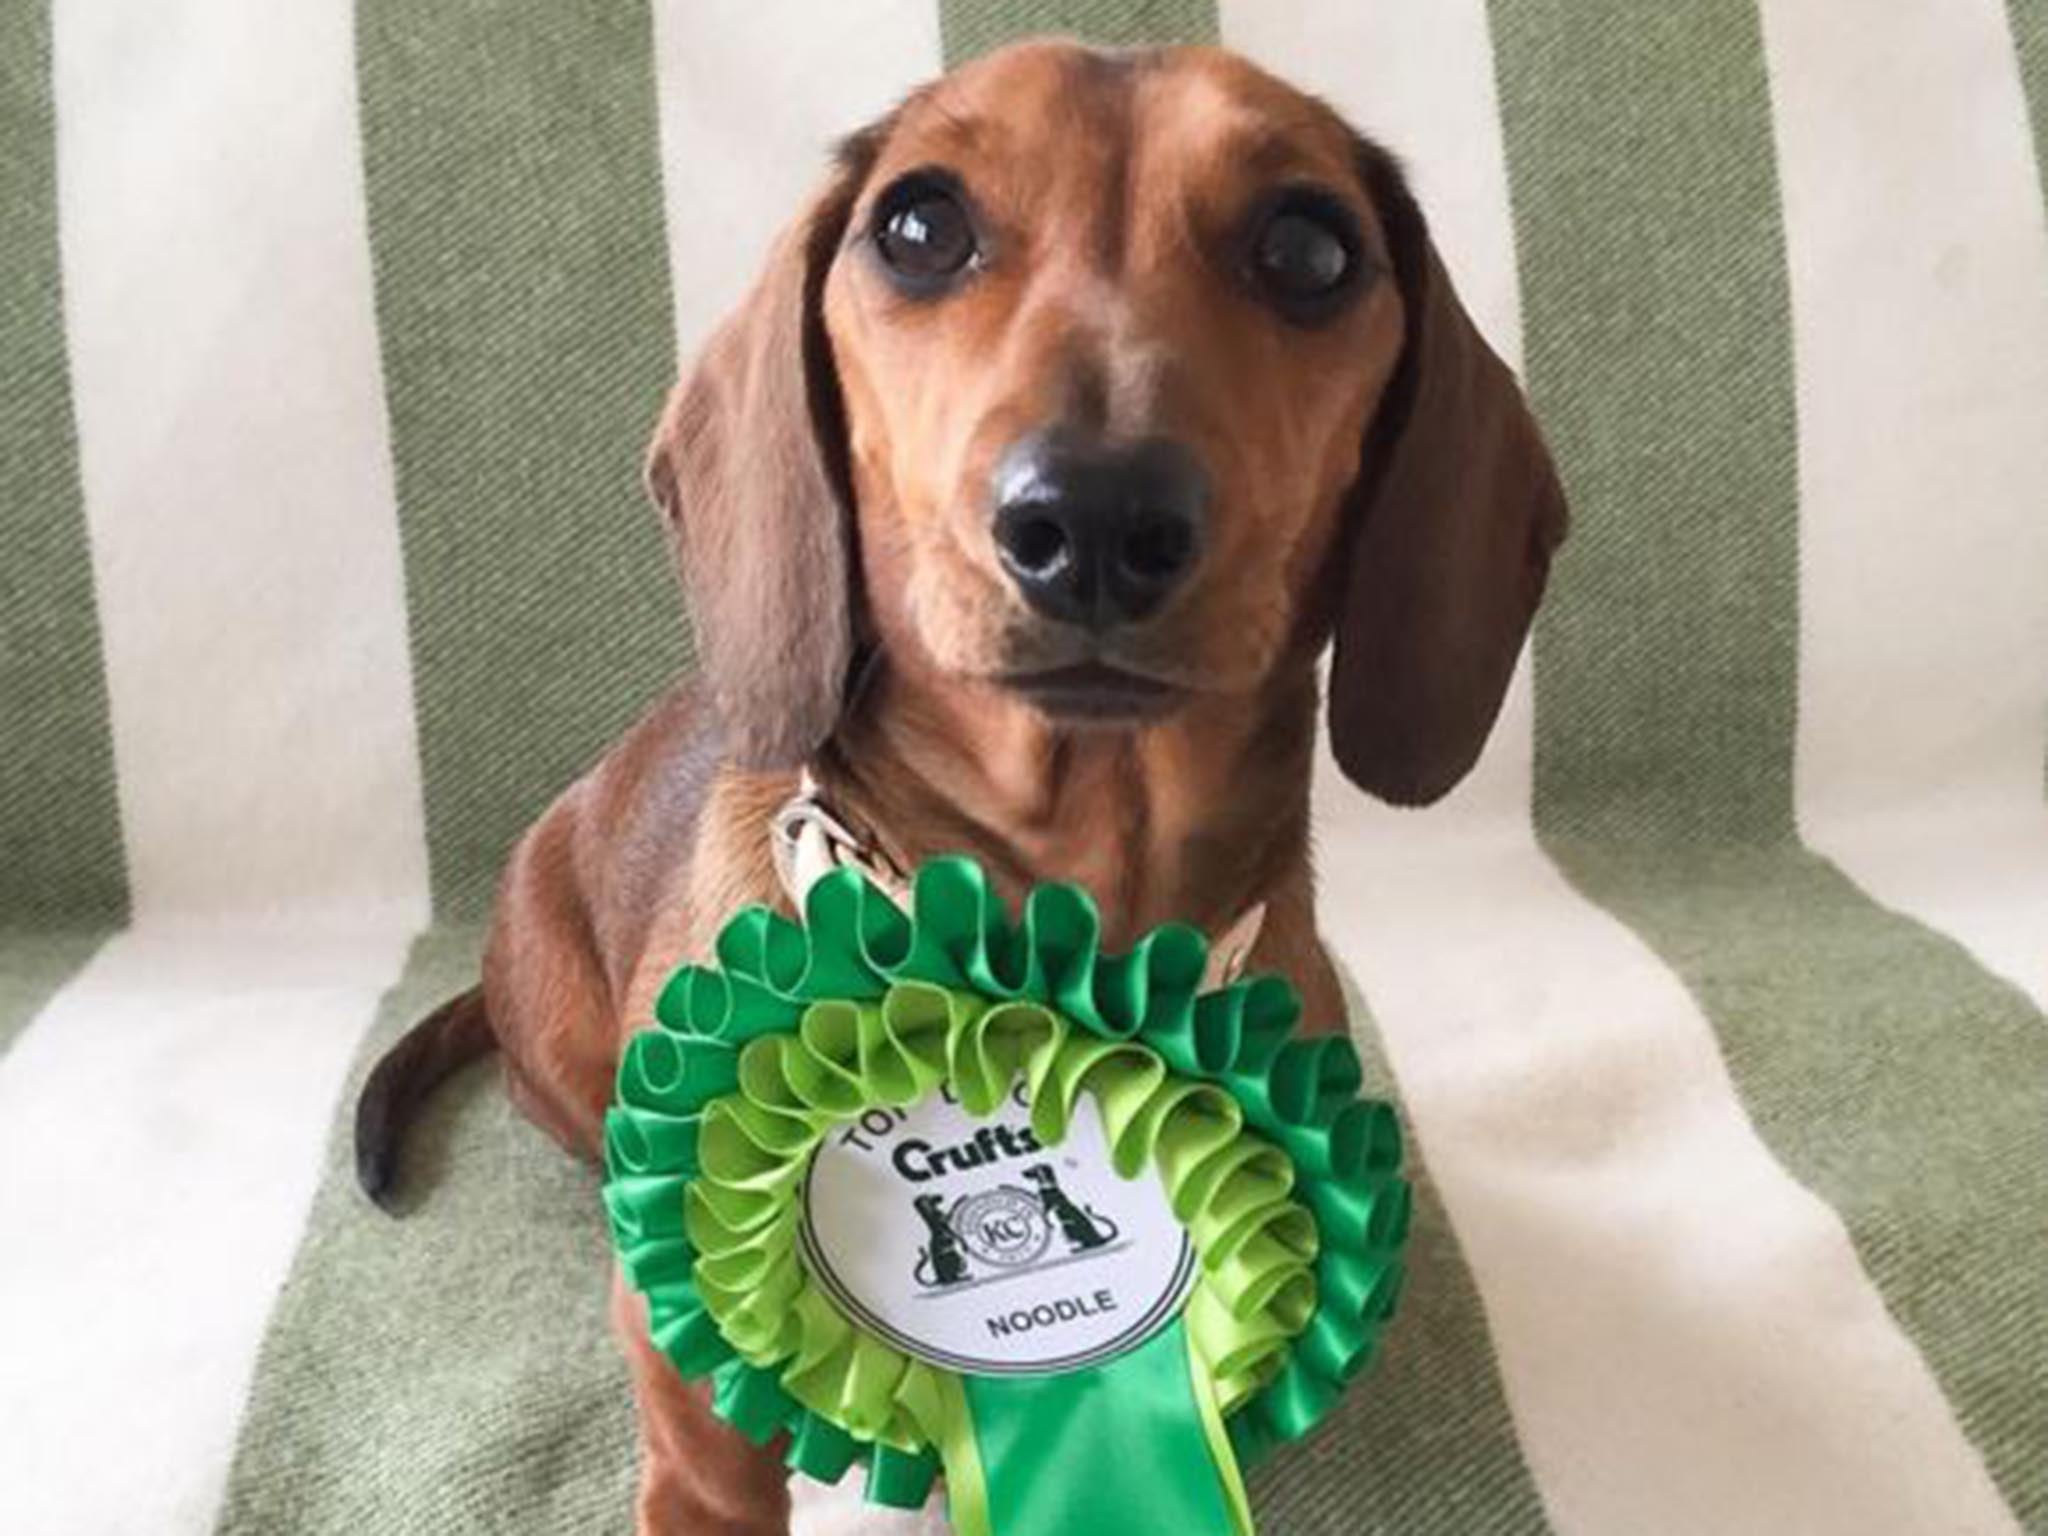 Lindsay Sanders, the owner of a miniature dachshund with more than 66,000 Instagram followers, said her two-year-old pet had received a warm welcome at Crufts from social media users.